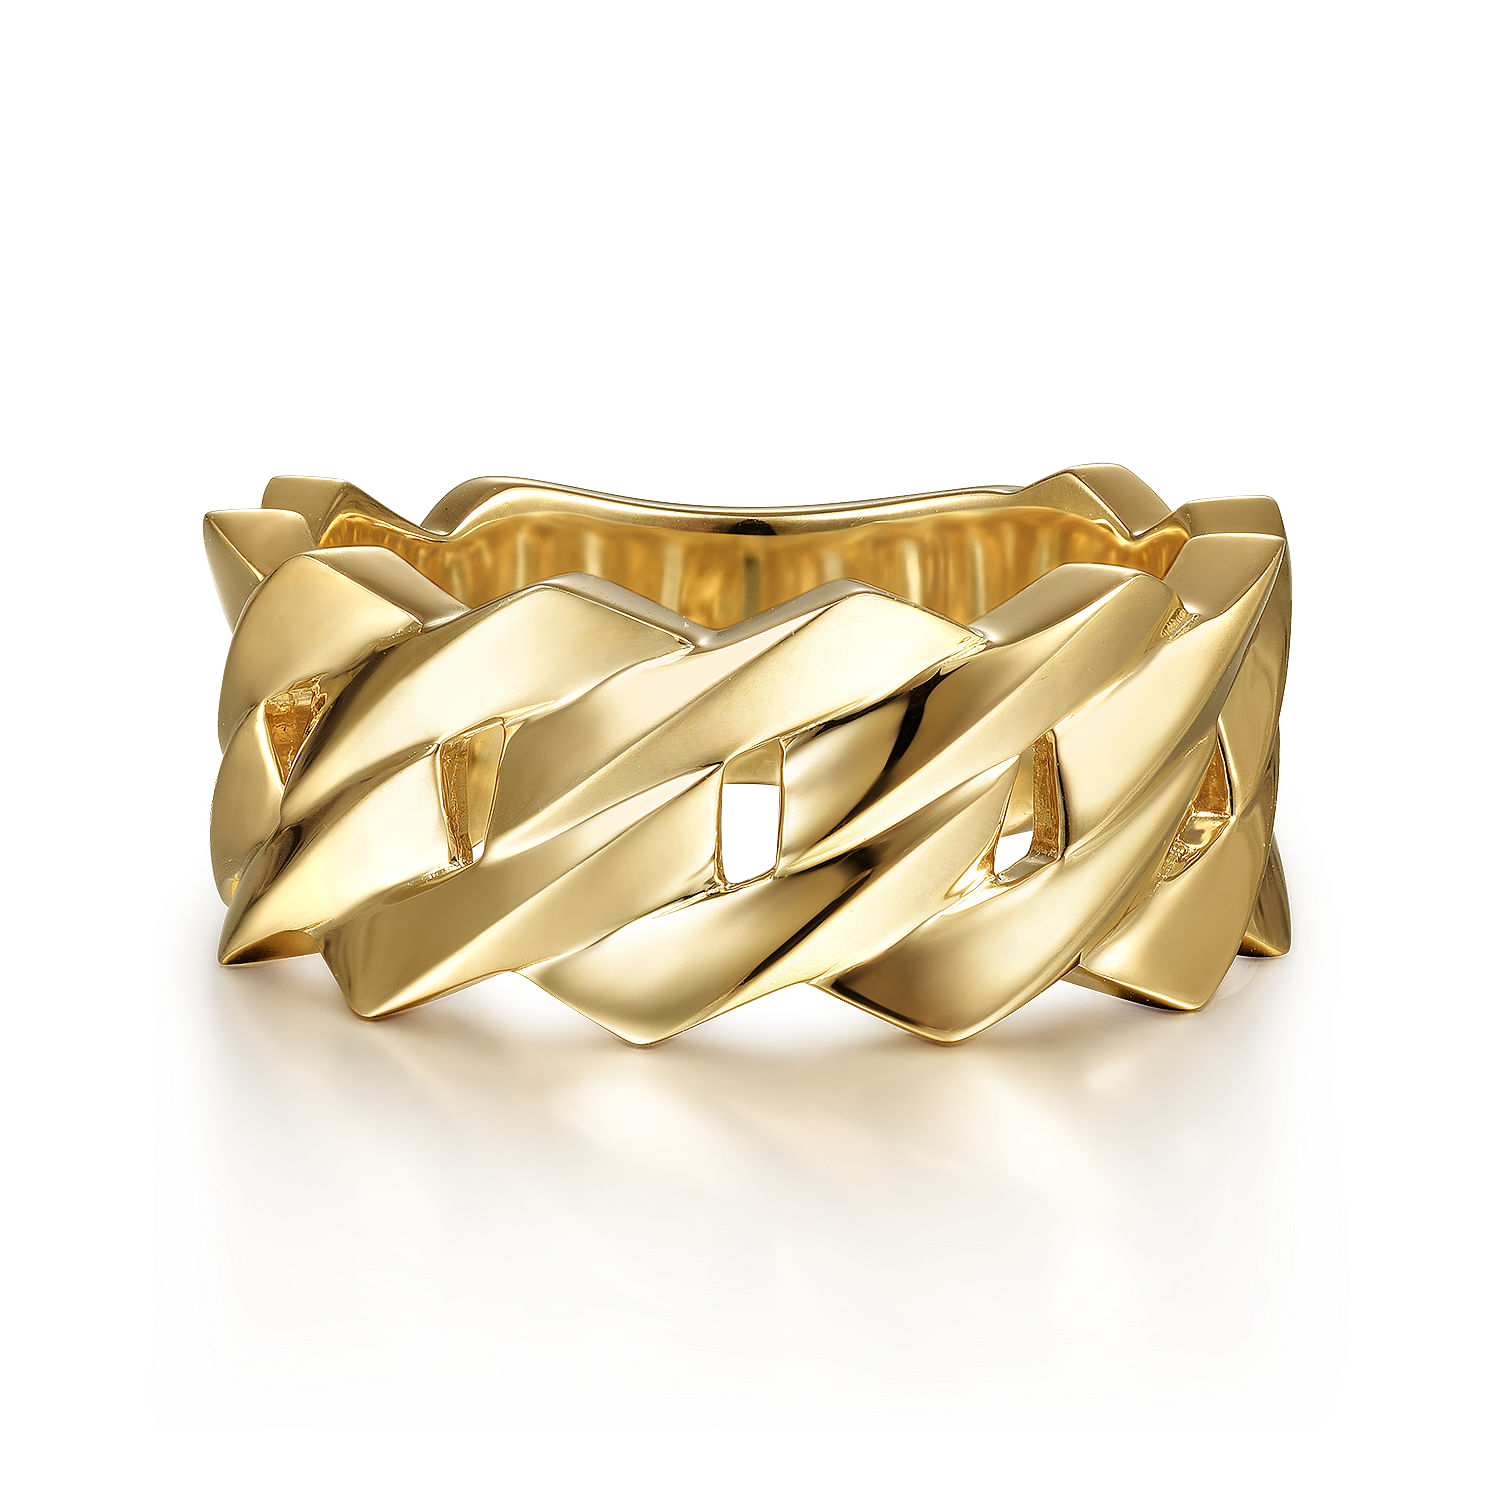 Wide 14K Yellow Gold Chain Link Band in High Polished Finish